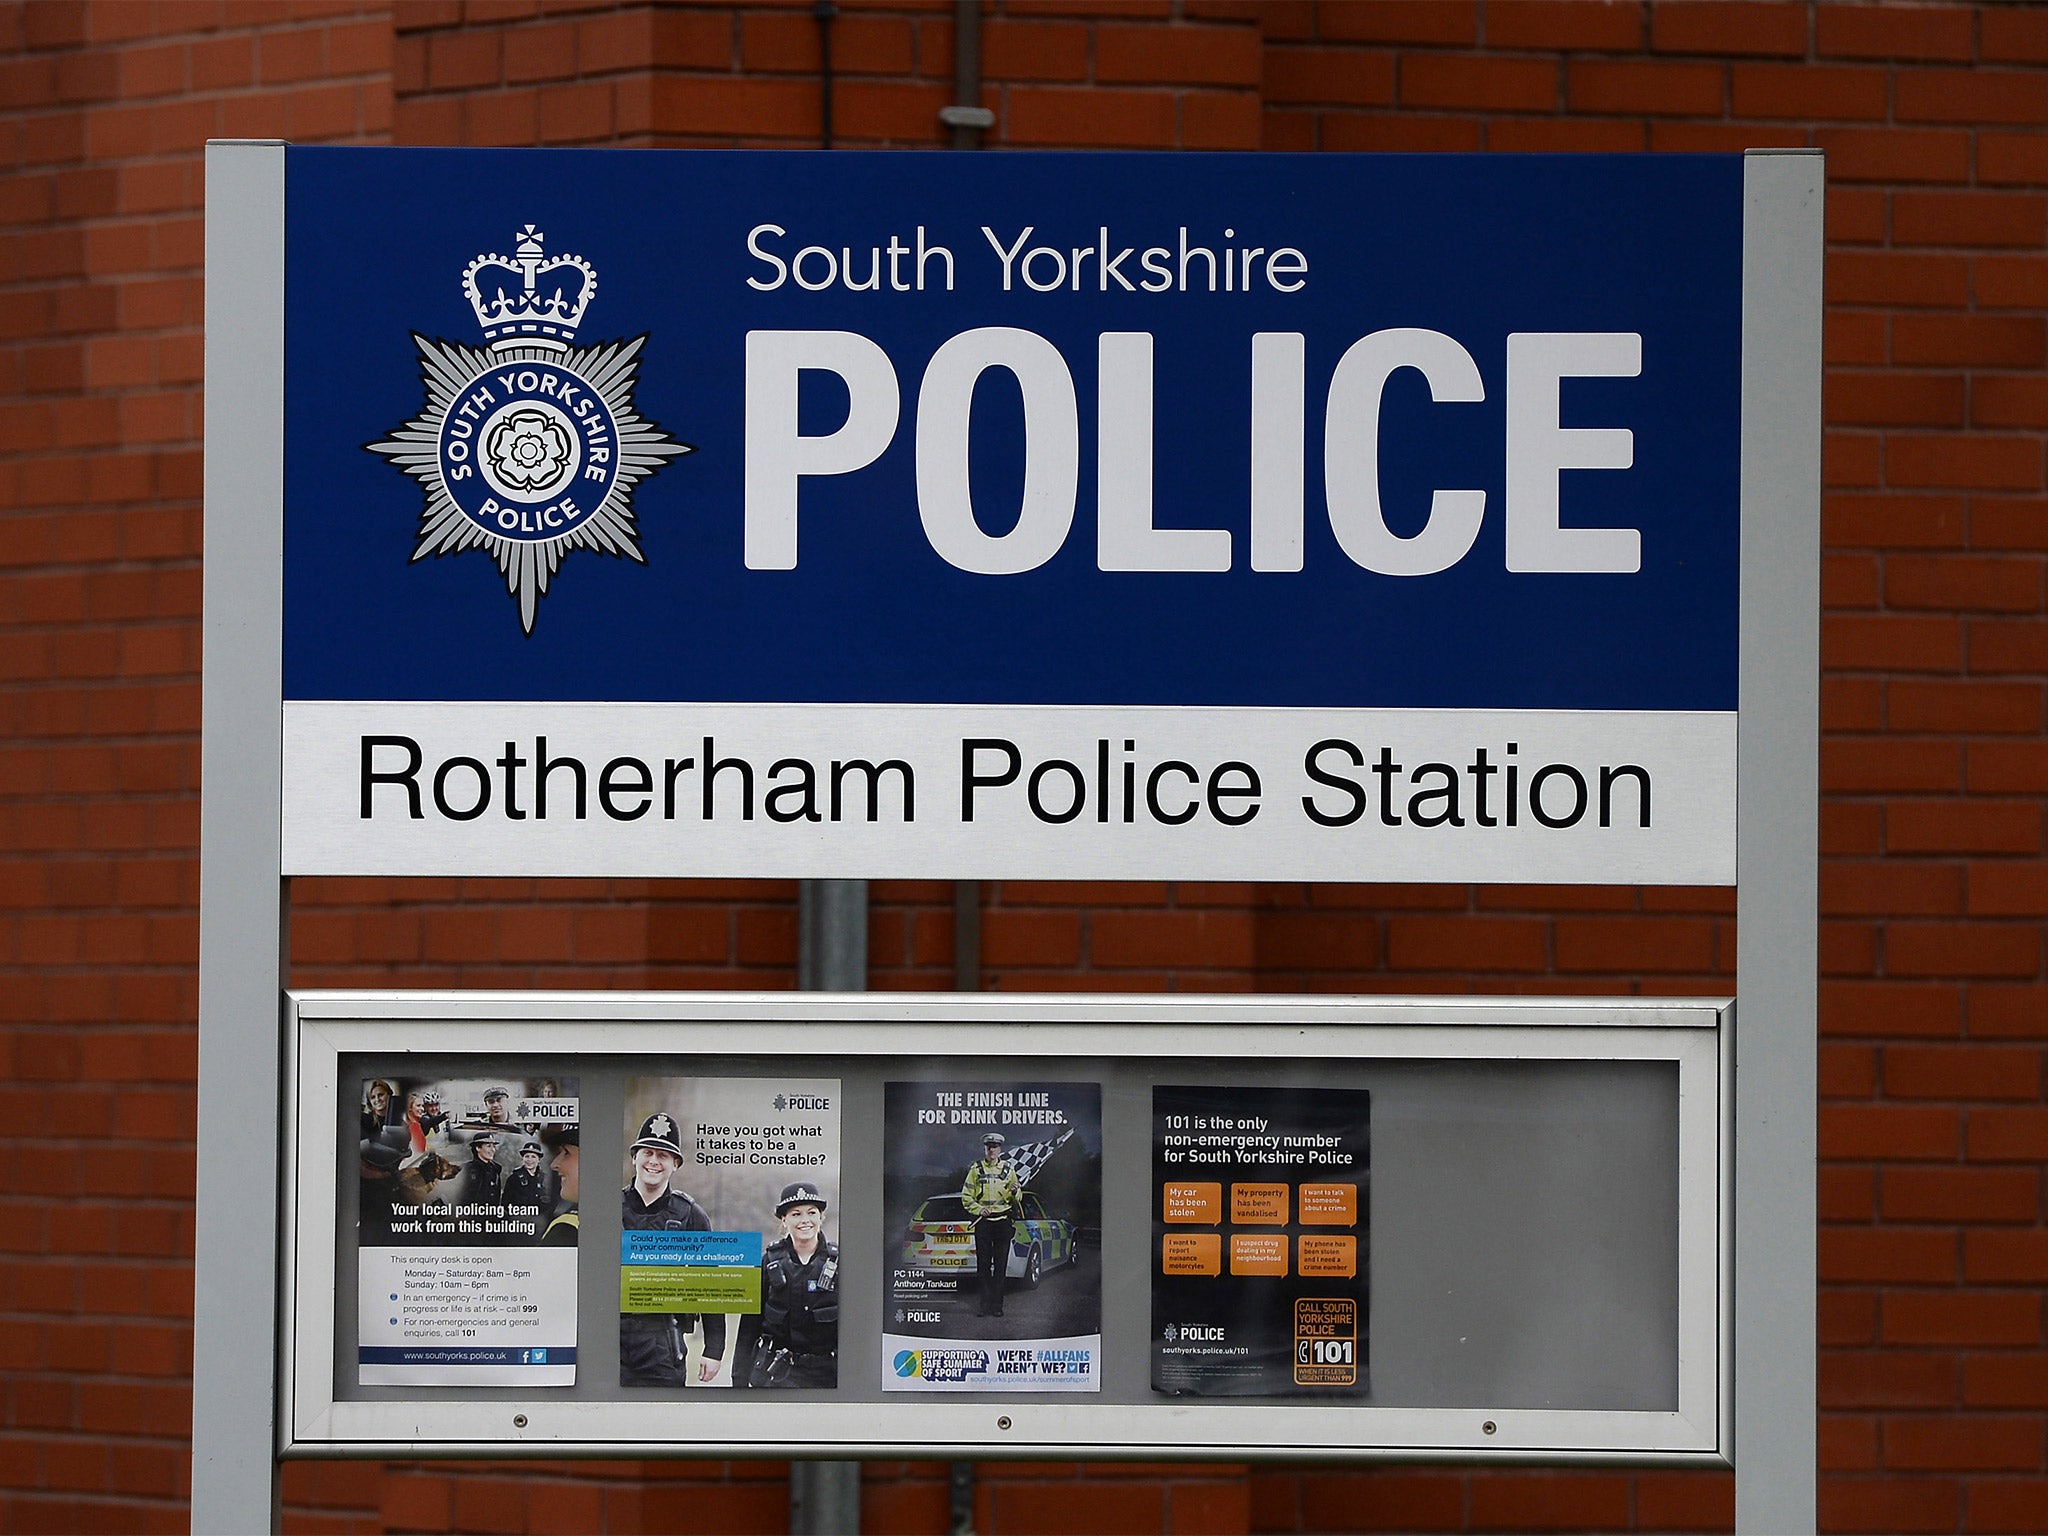 South Yorkshire Police have been accused of treating victims with contempt